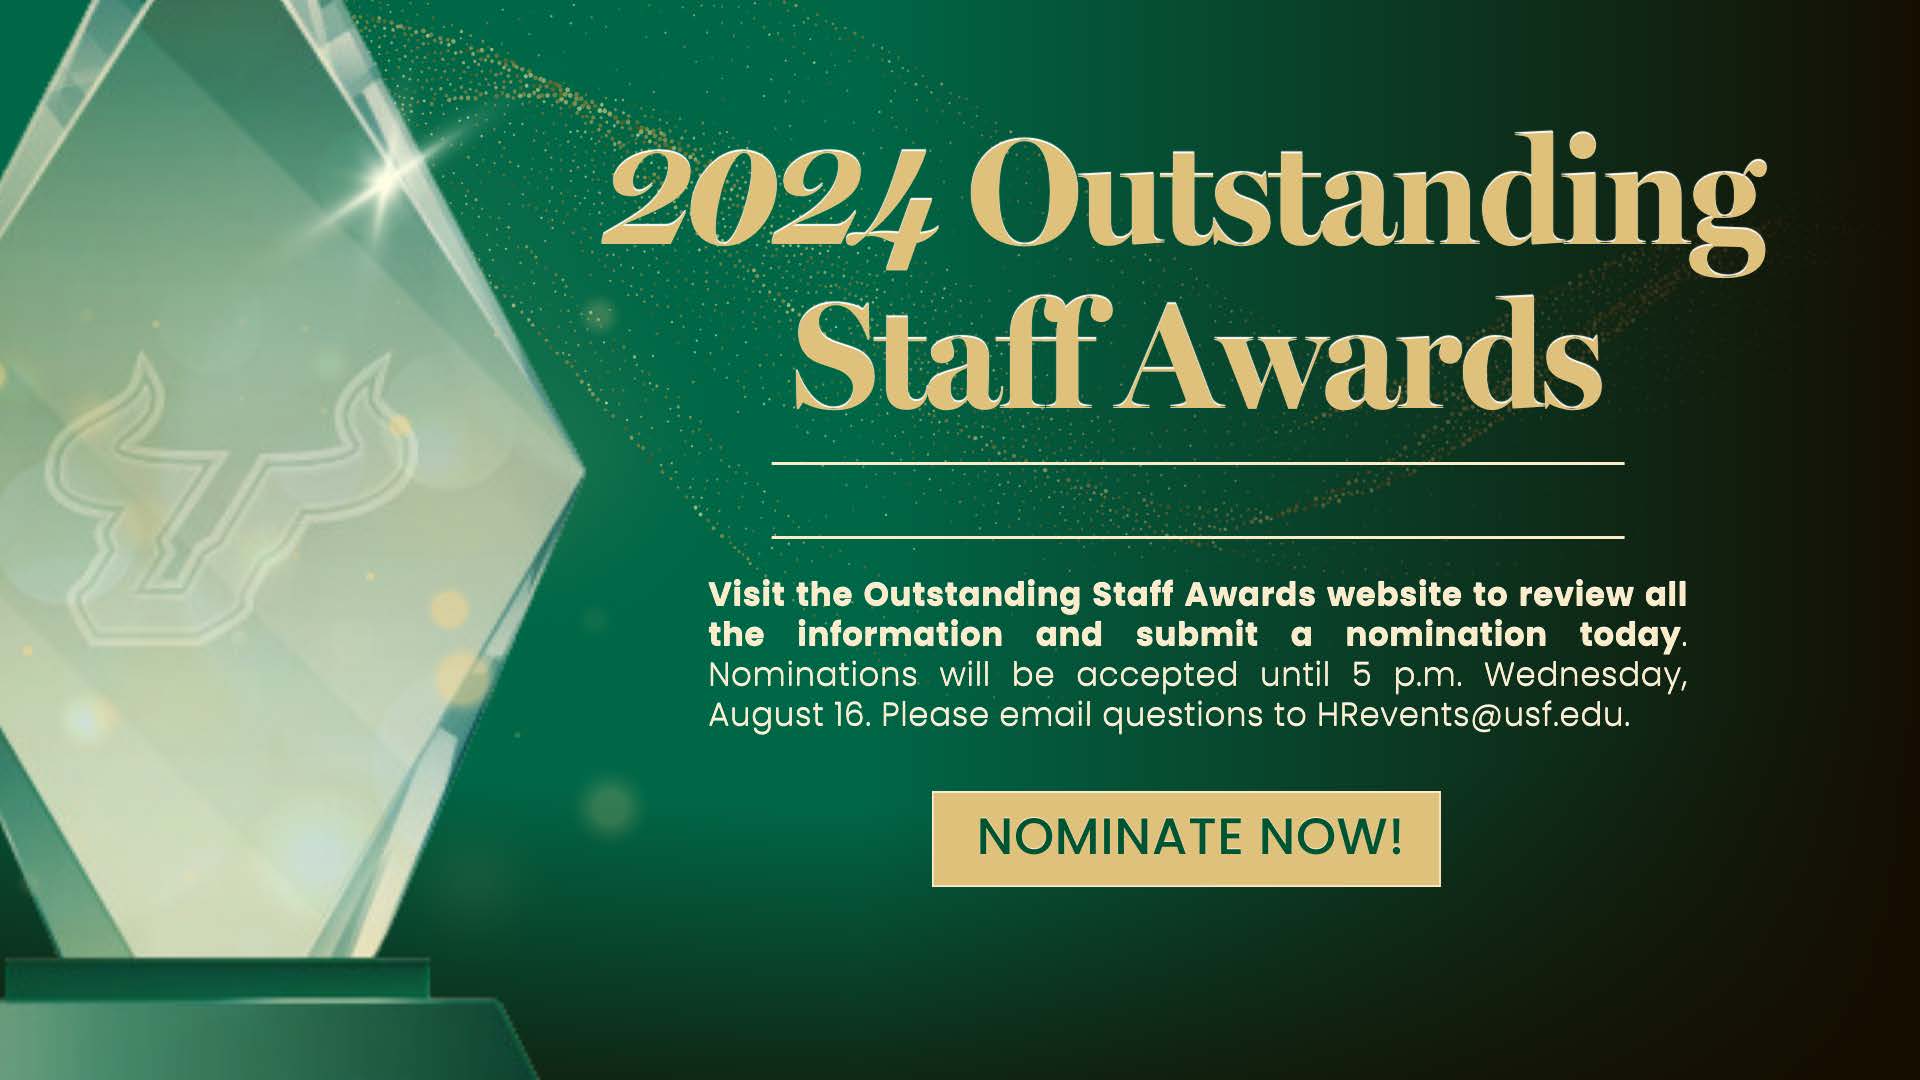 2024 Outstanding Staff Award Nominations are Currently Being Accepted